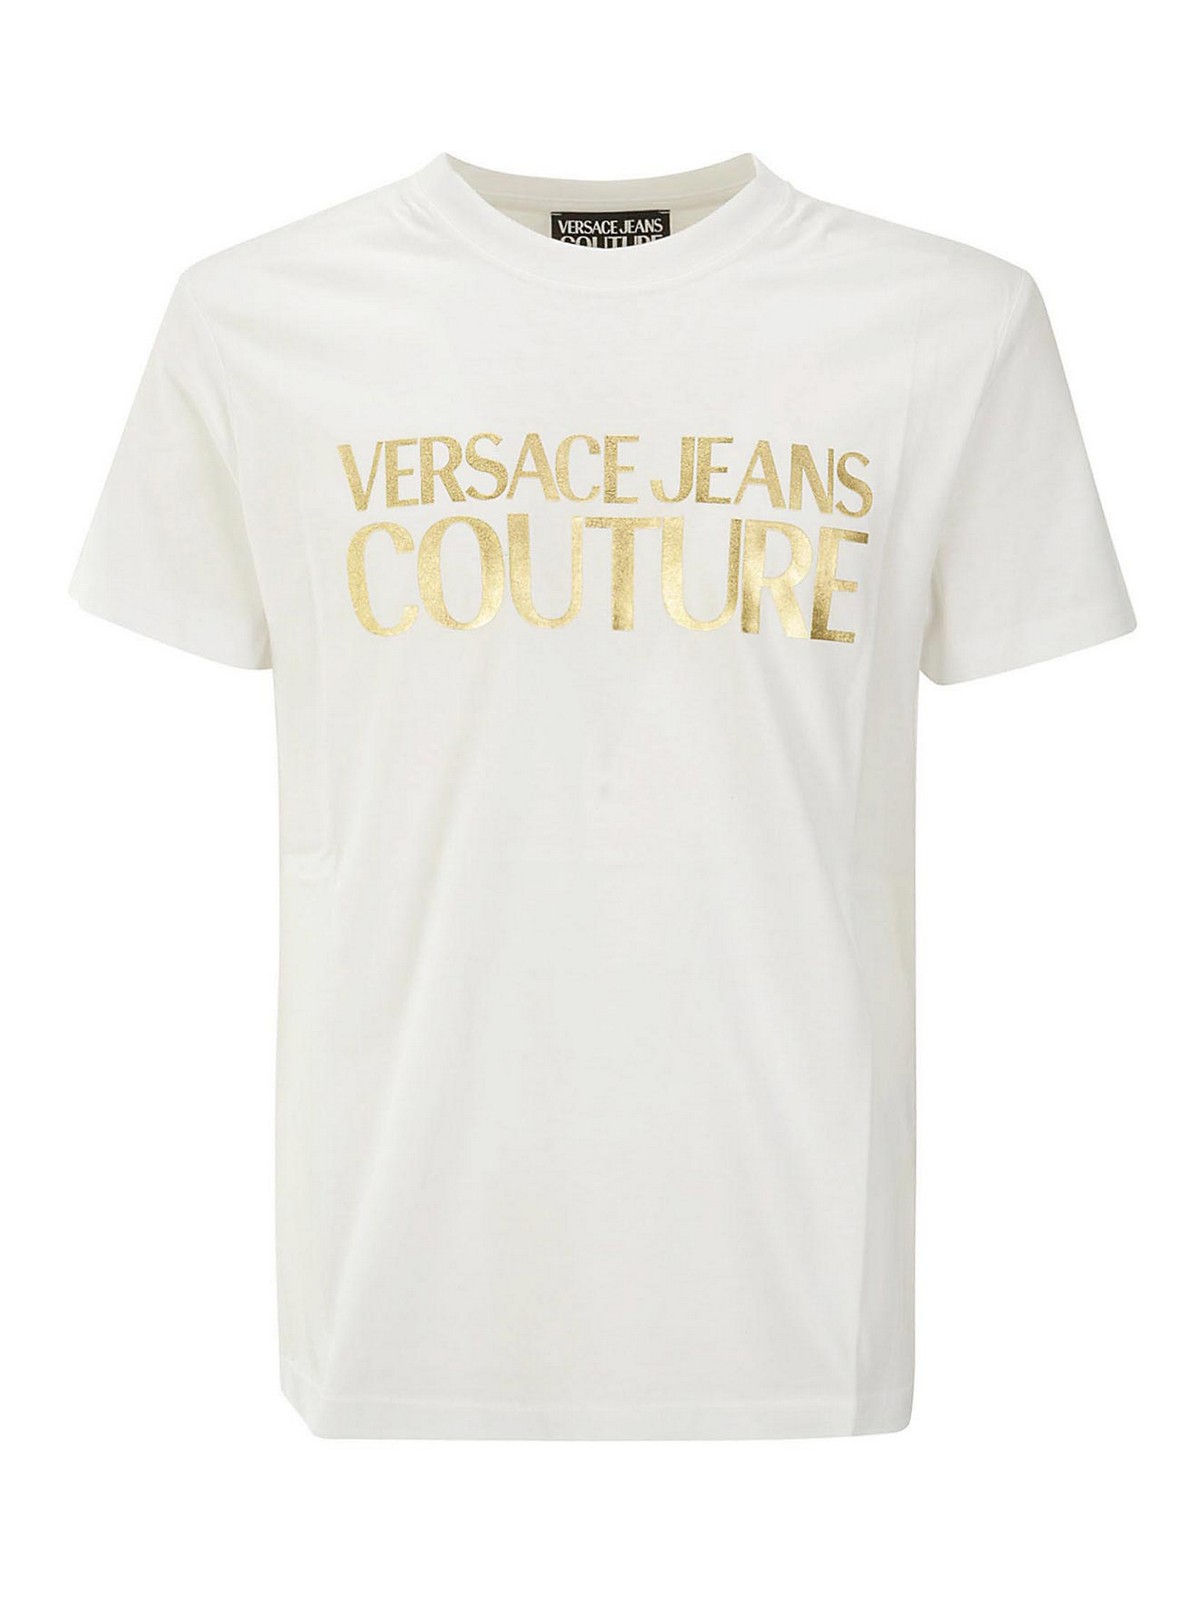 Versace Jeans Tee In Gold